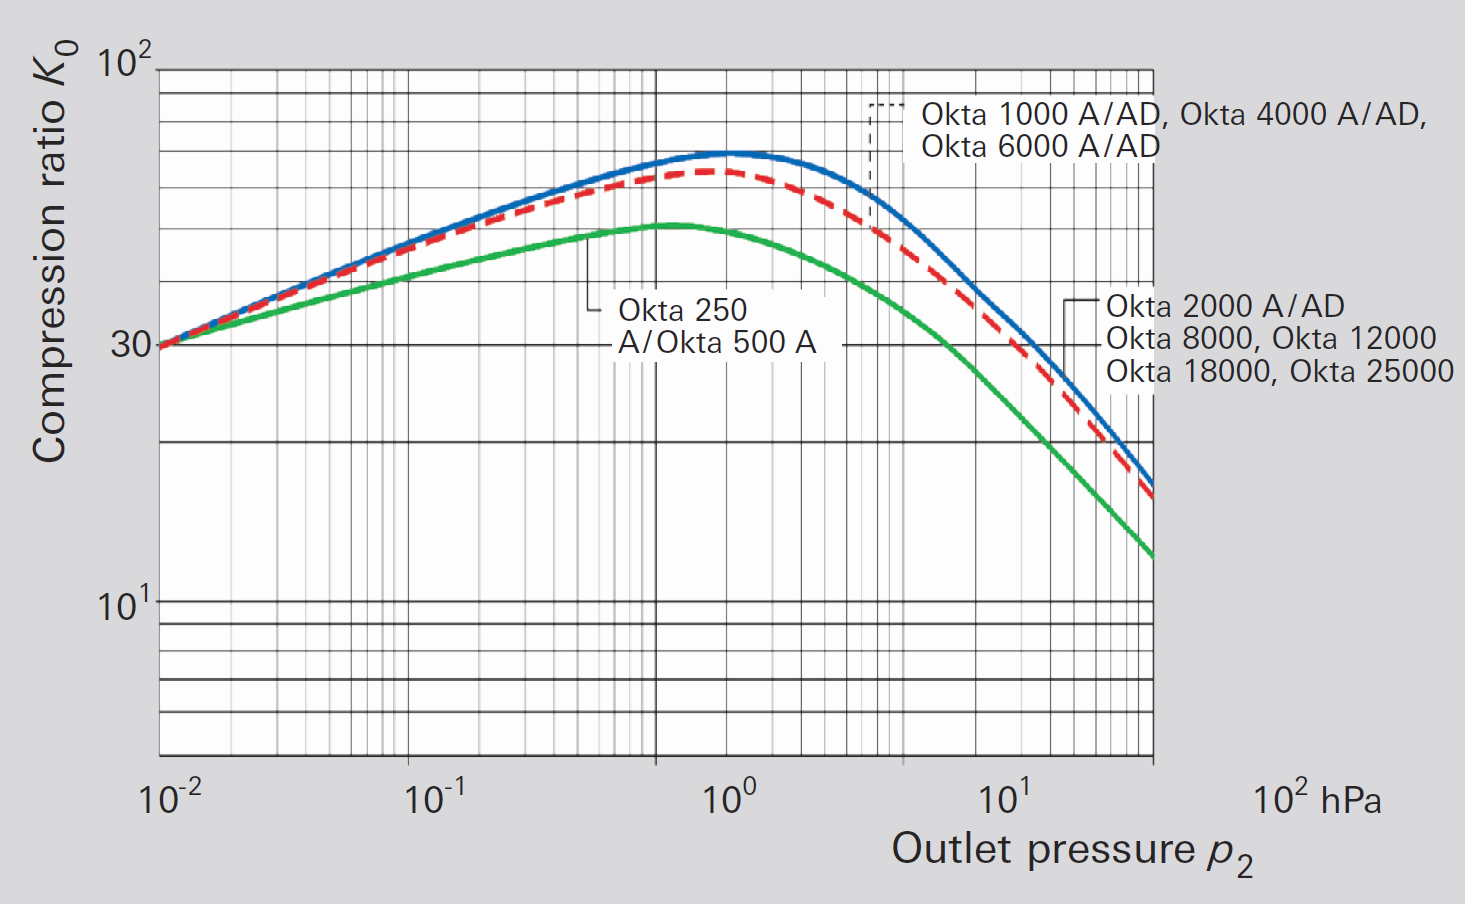 No-load compression ratio for air for Roots
					pumps